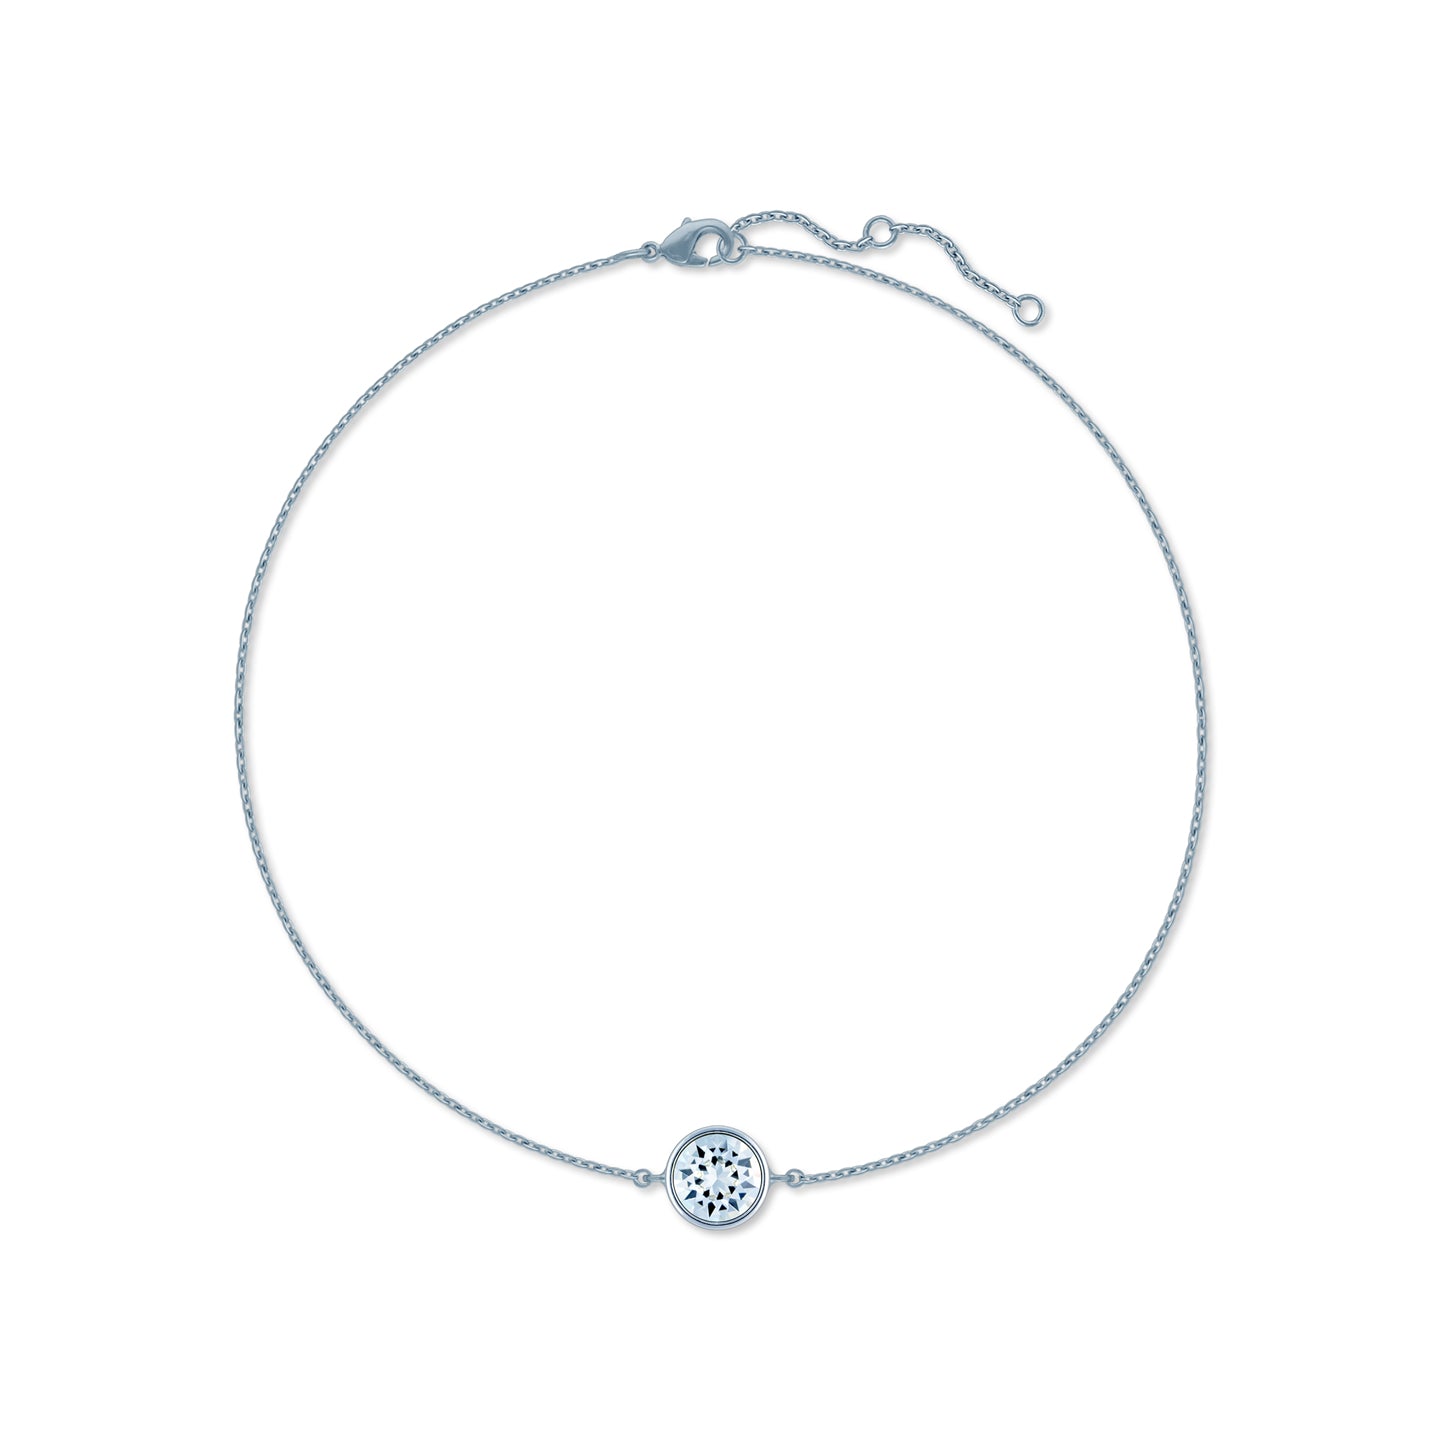 Harley Chain Bracelet with White Clear Round Crystals from Swarovski Silver Toned Rhodium Plated - Ed Heart